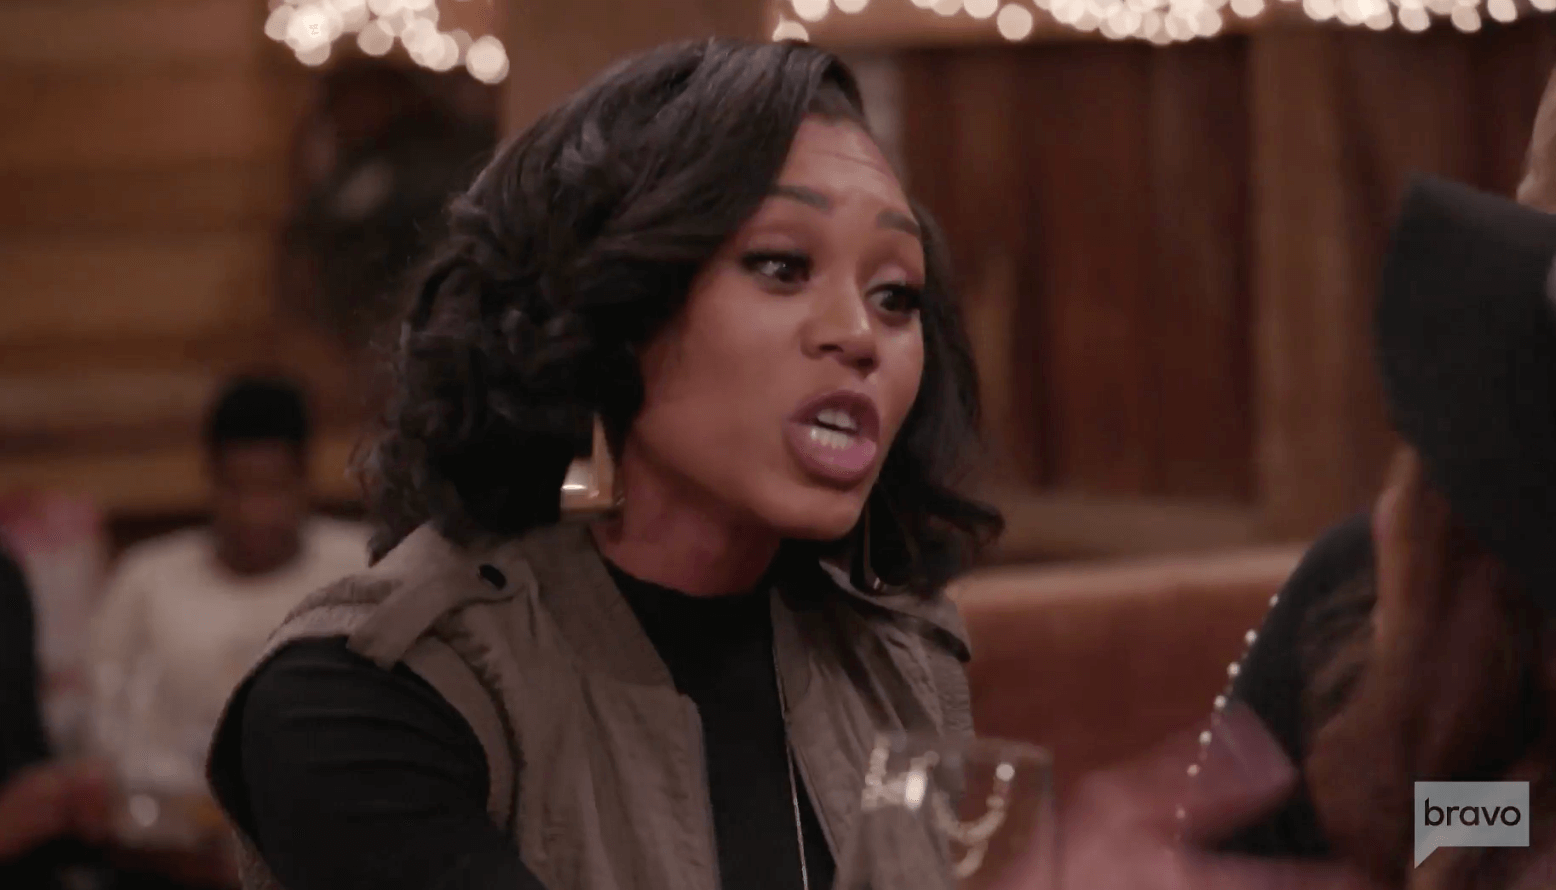 EXCLUSIVE: Blow By Blow Details of Monique Samuels & Candiace Dillard’s Violent Fight! ‘She Reached For A Knife’